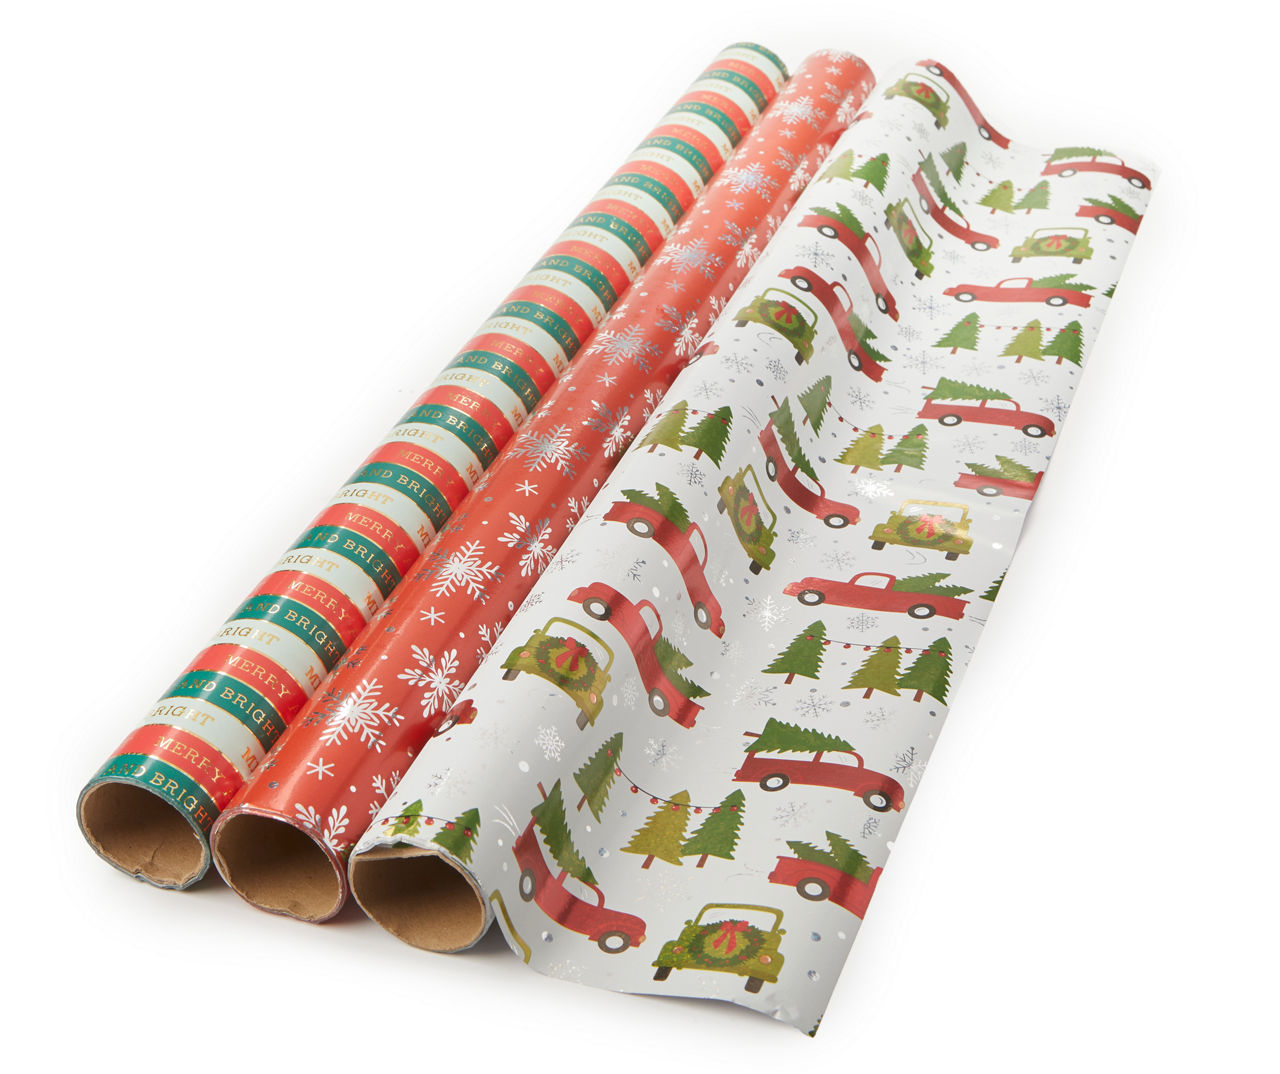 Winter Glow 3-Pack Christmas Wrapping Paper Assortment, 80 sq. ft.